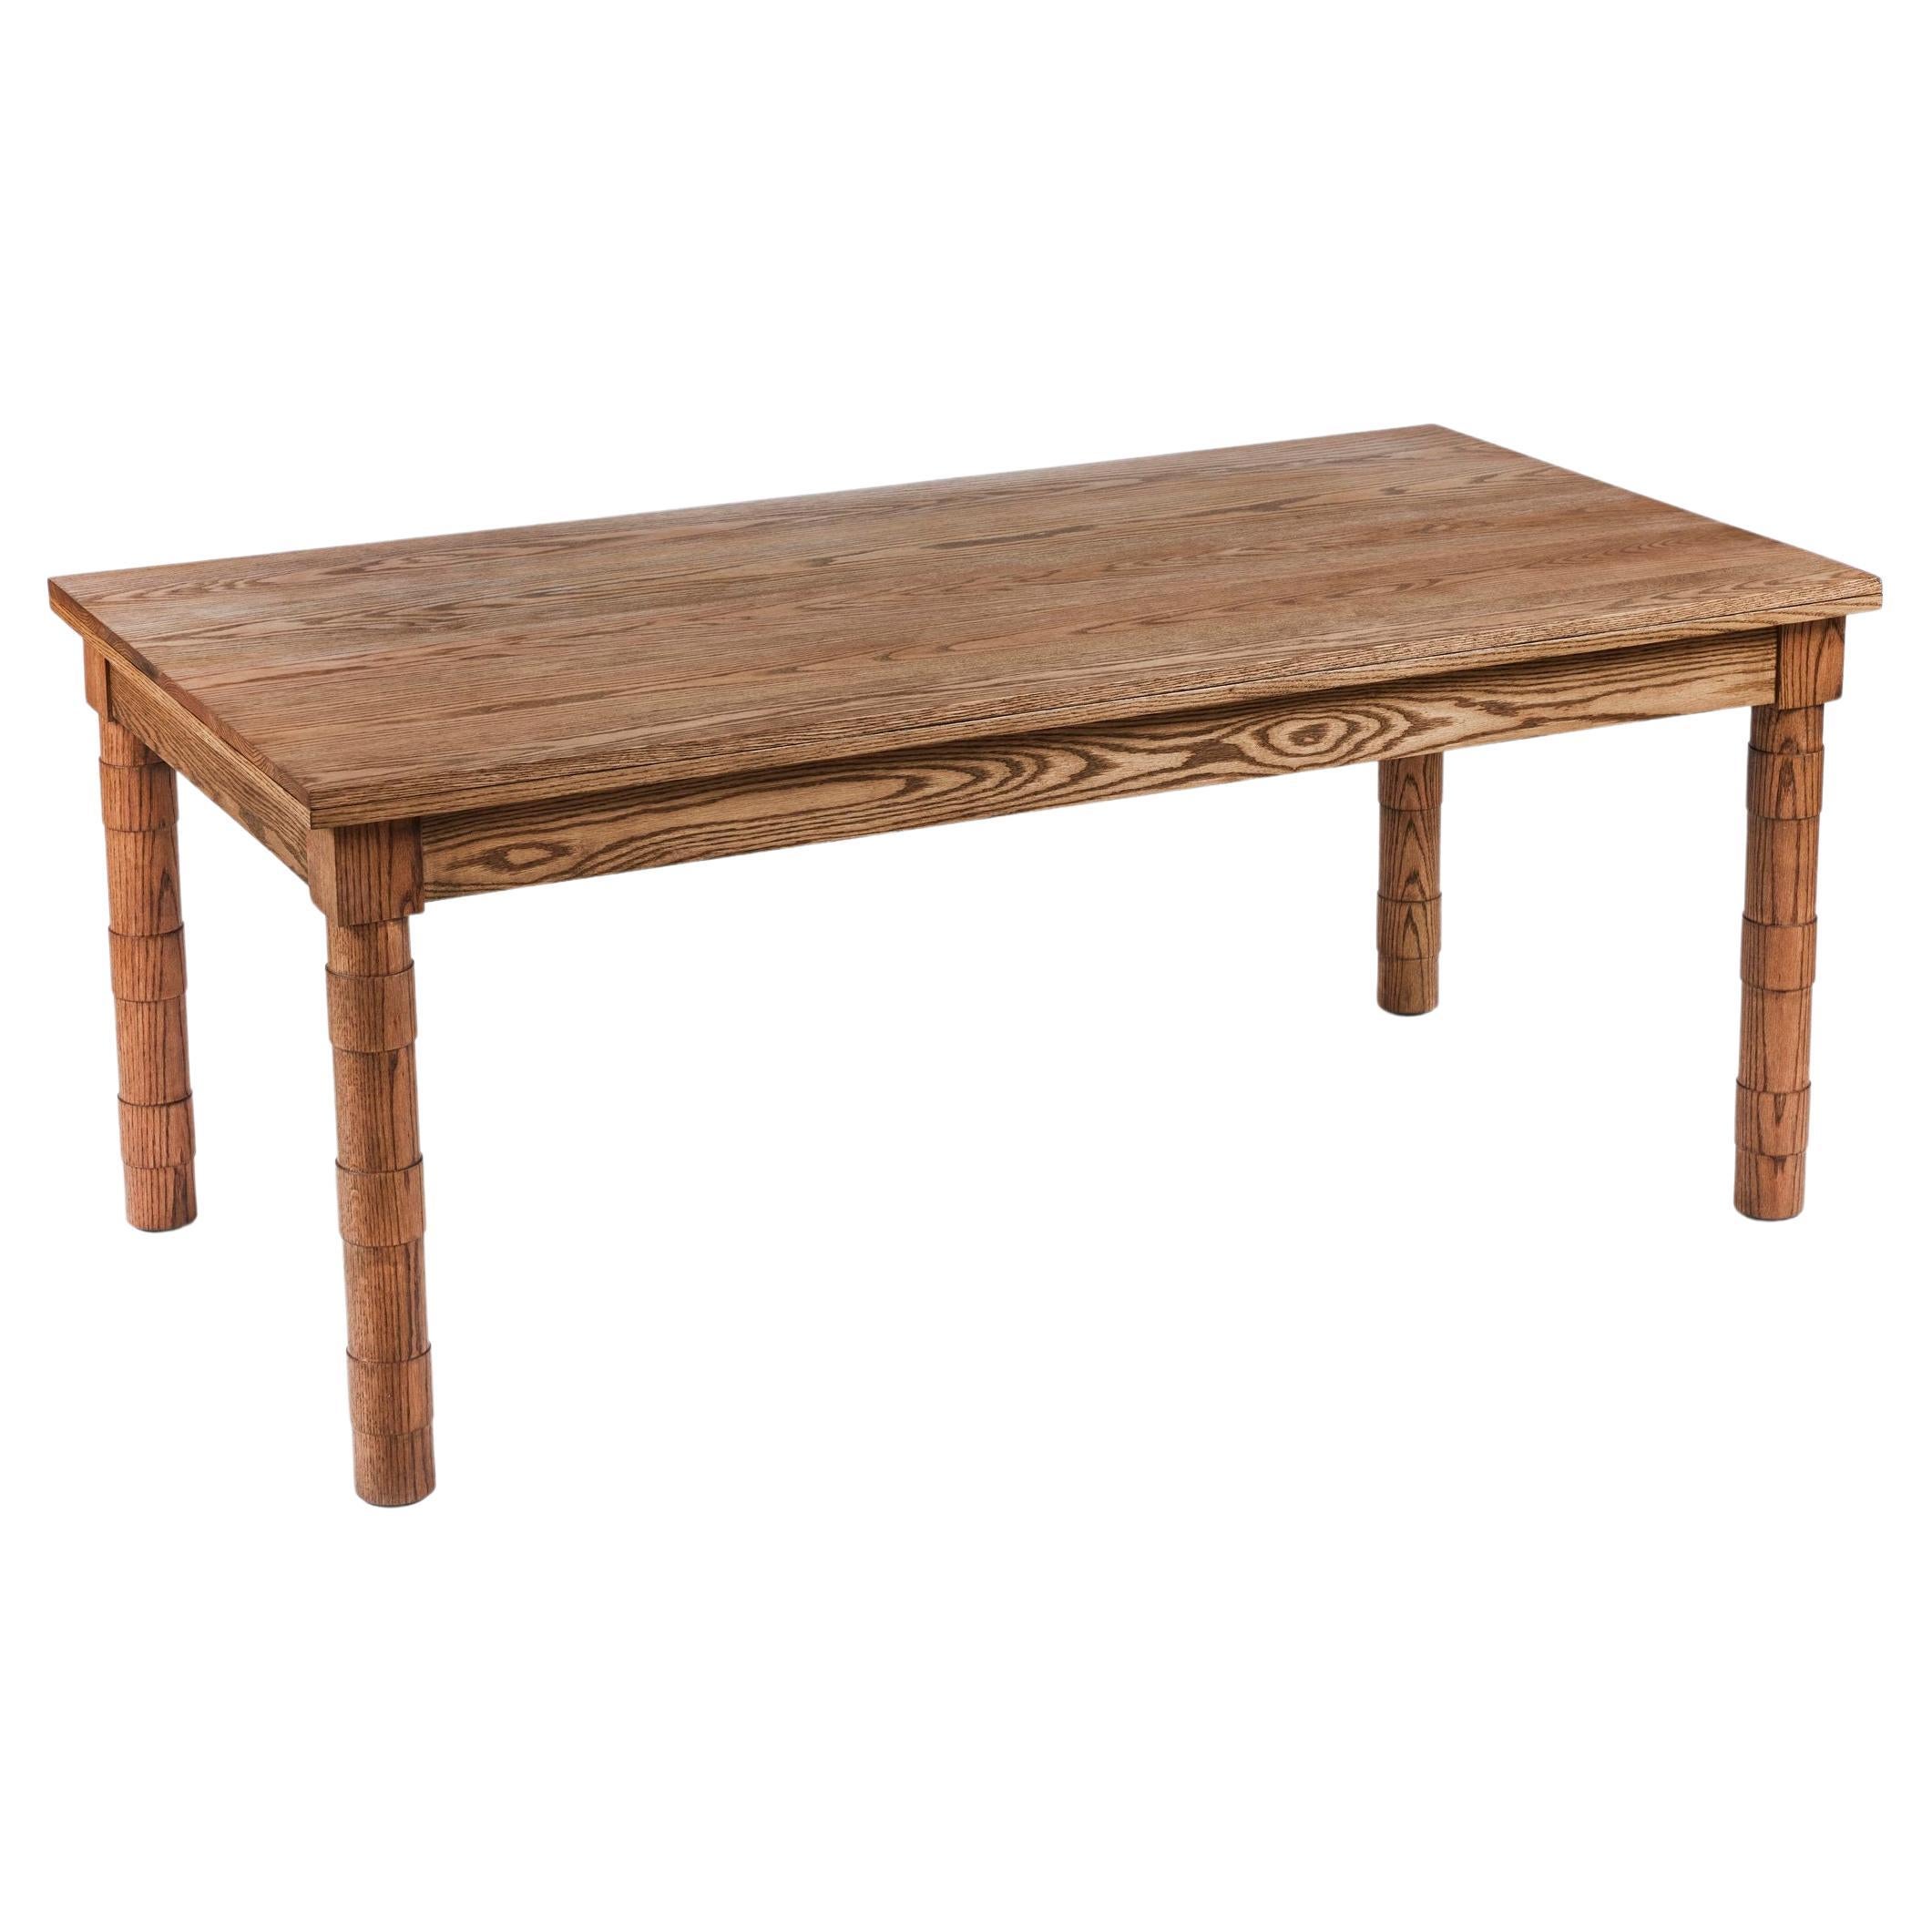 Transitional Turned Leg Jenks Dining Table in Tanned Oak by Martin and Brockett